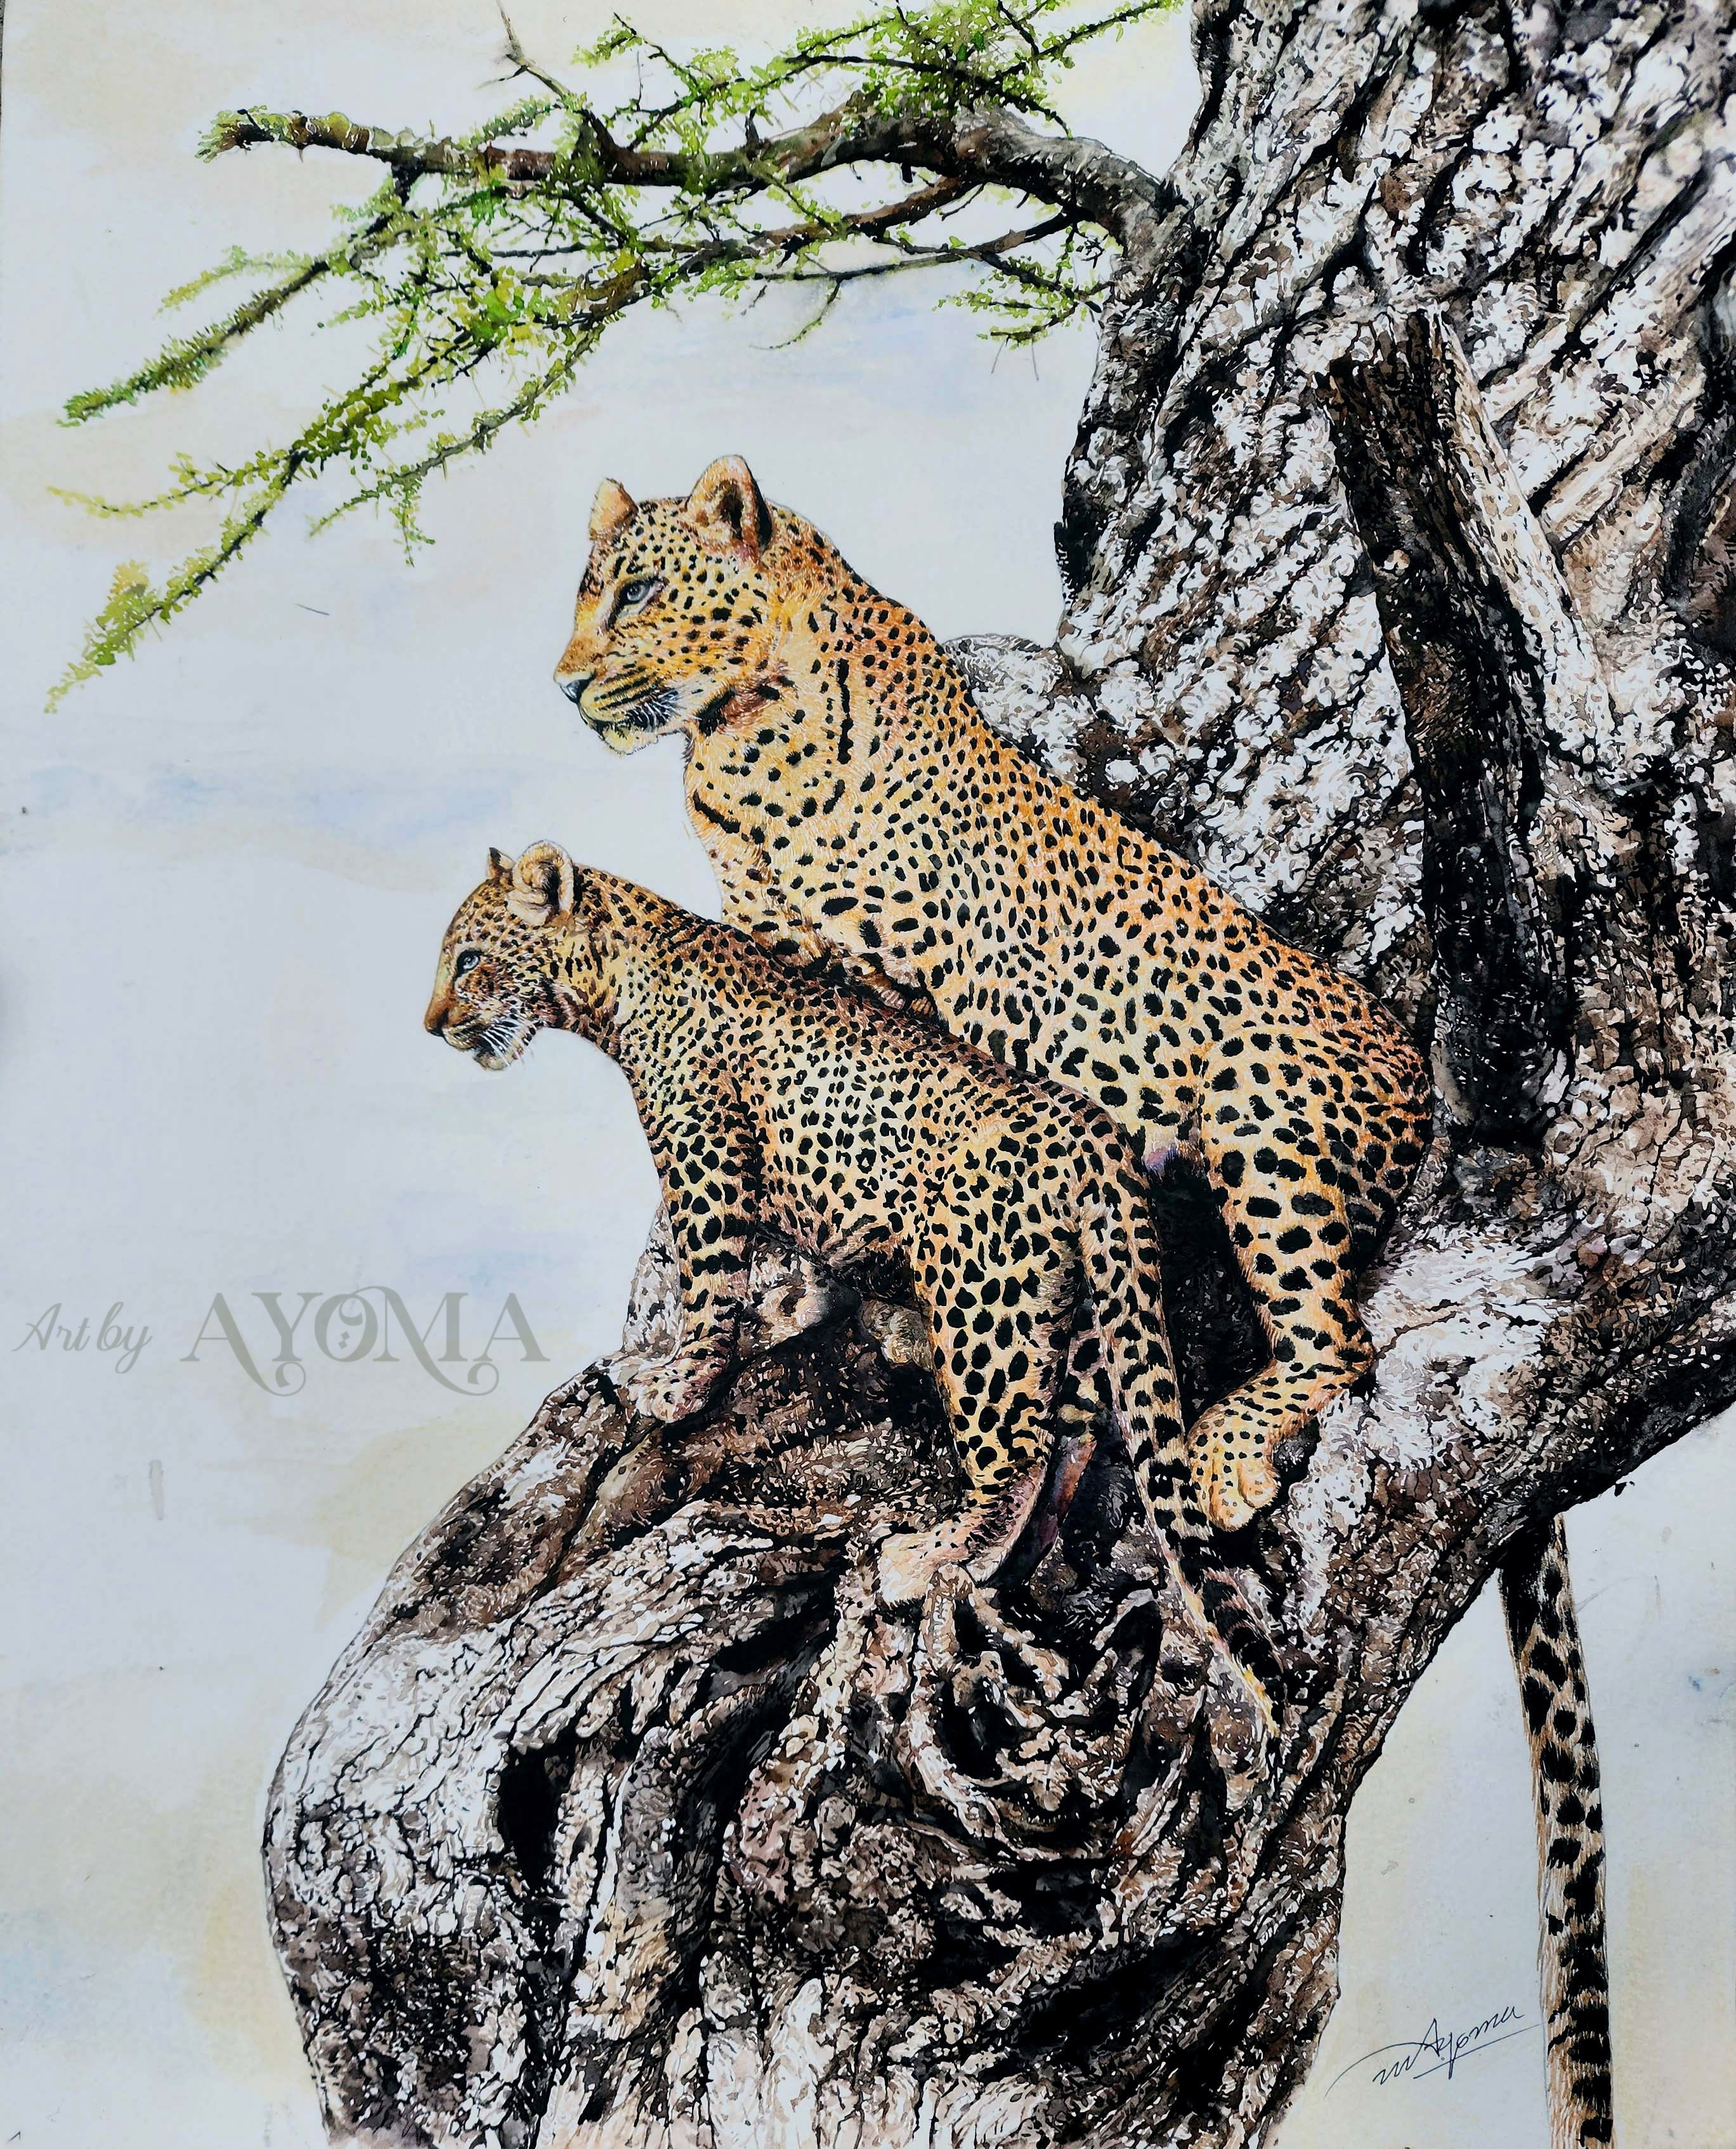 the Jaguar by Ayoma Wijerathne